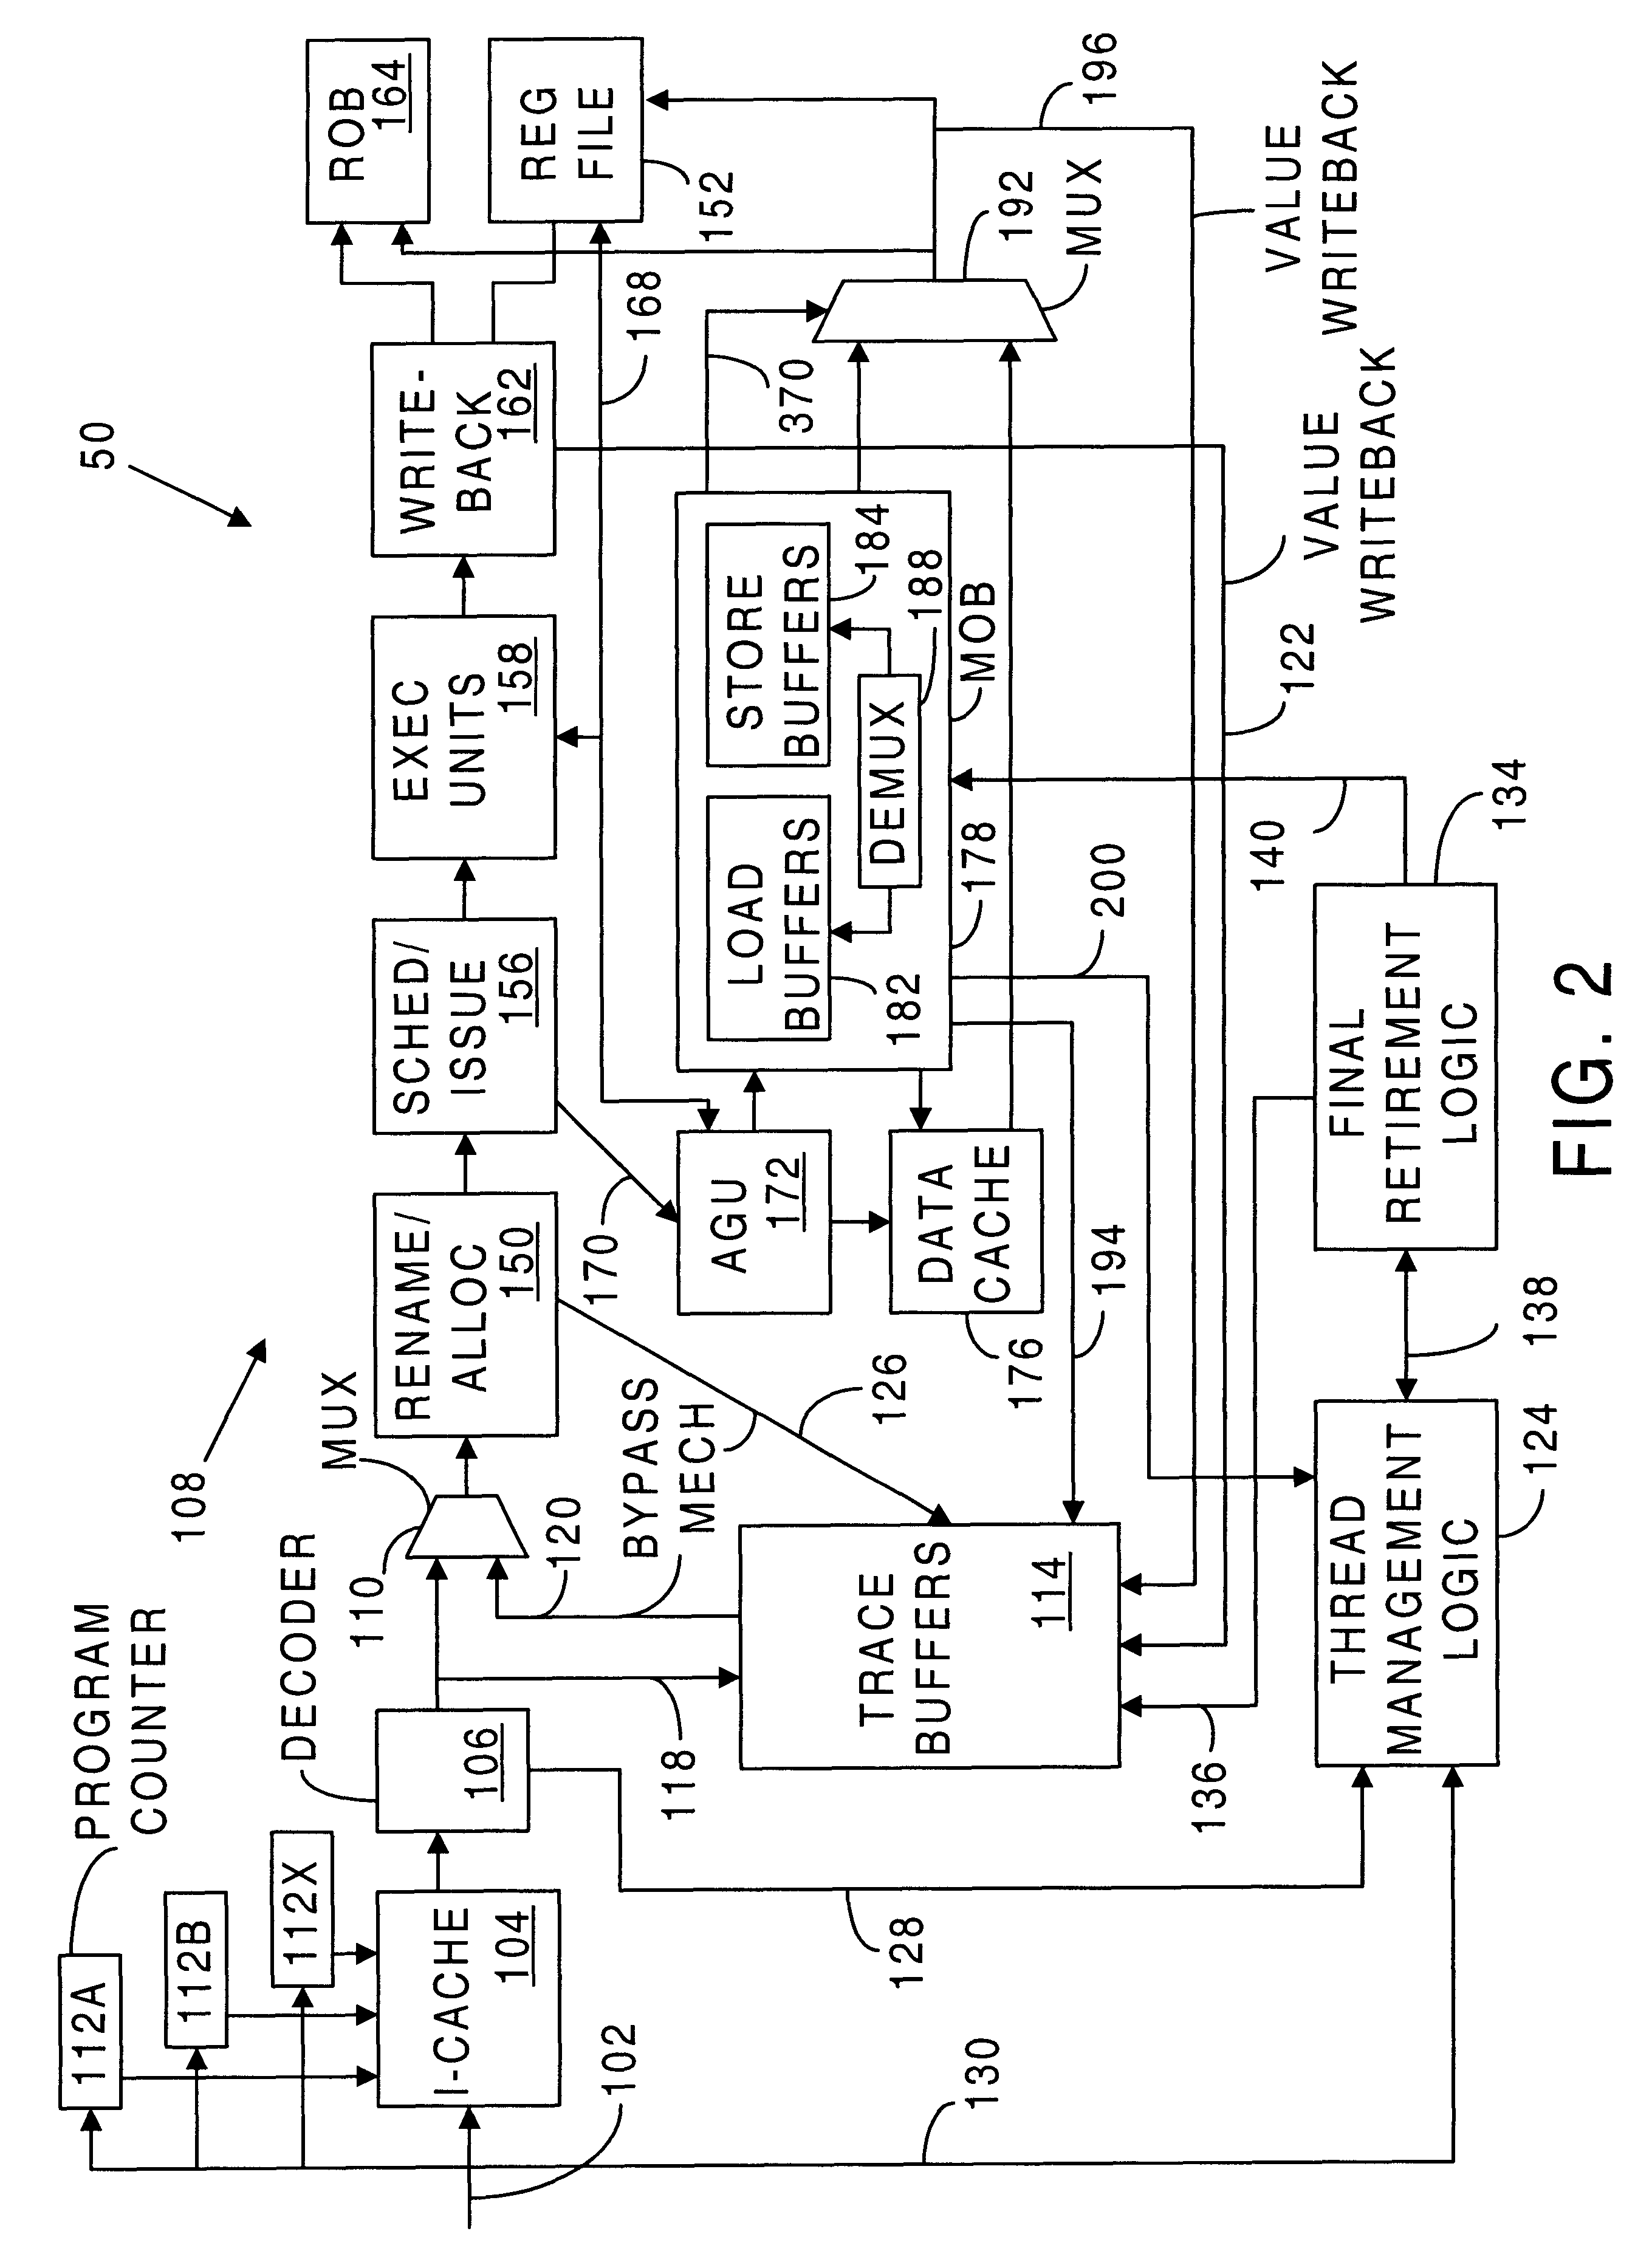 Memory system for ordering load and store instructions in a processor that performs multithread execution